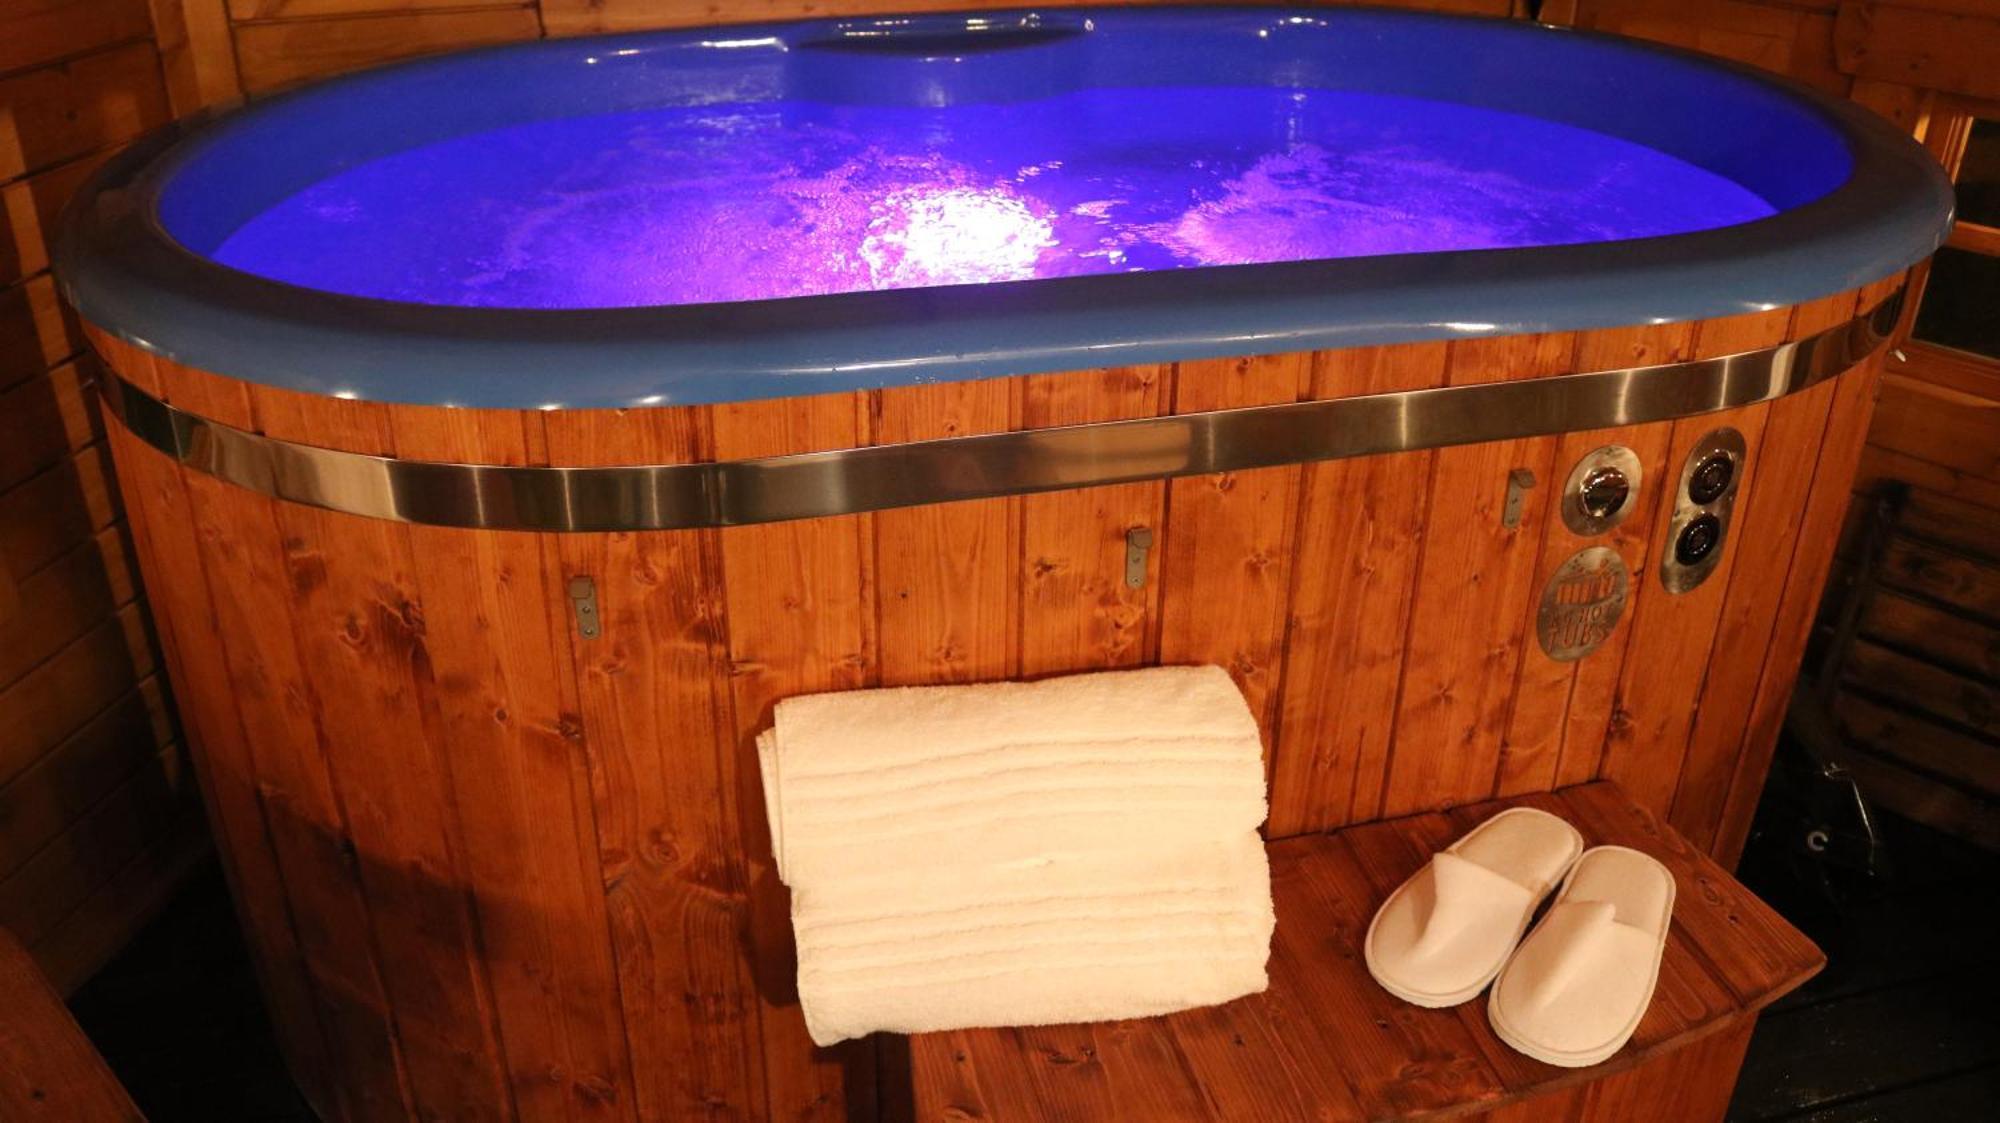 Elsay May Luxury Hot Tub Lodges Exclusively For Couples Over 25Yrs And Dog Friendly 坦伯利 外观 照片